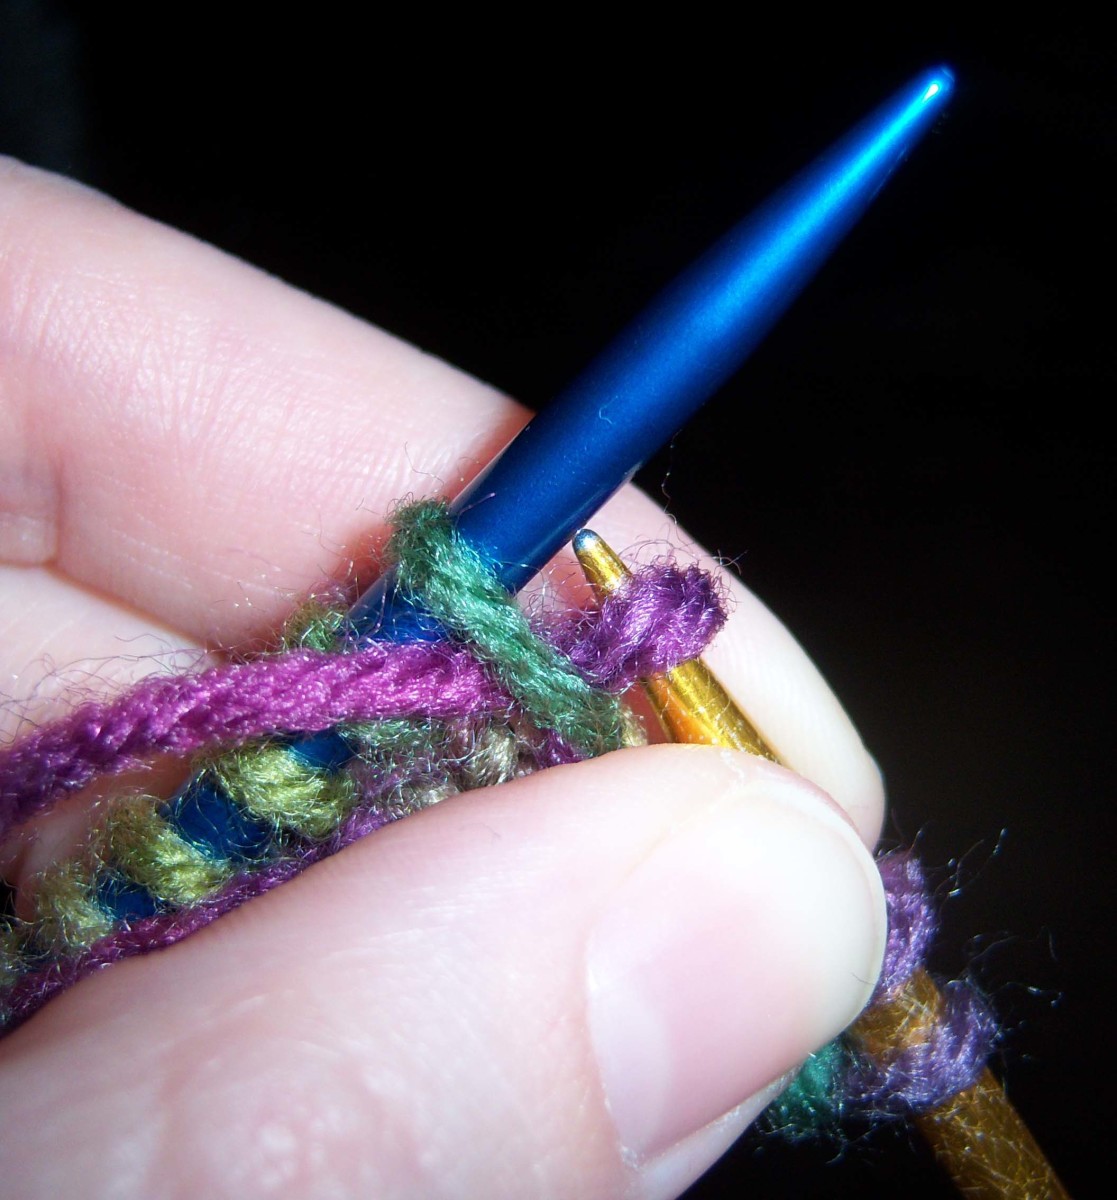 The gold needle is pulled free from the last stitch on the blue one, but not from the looped over yarn.